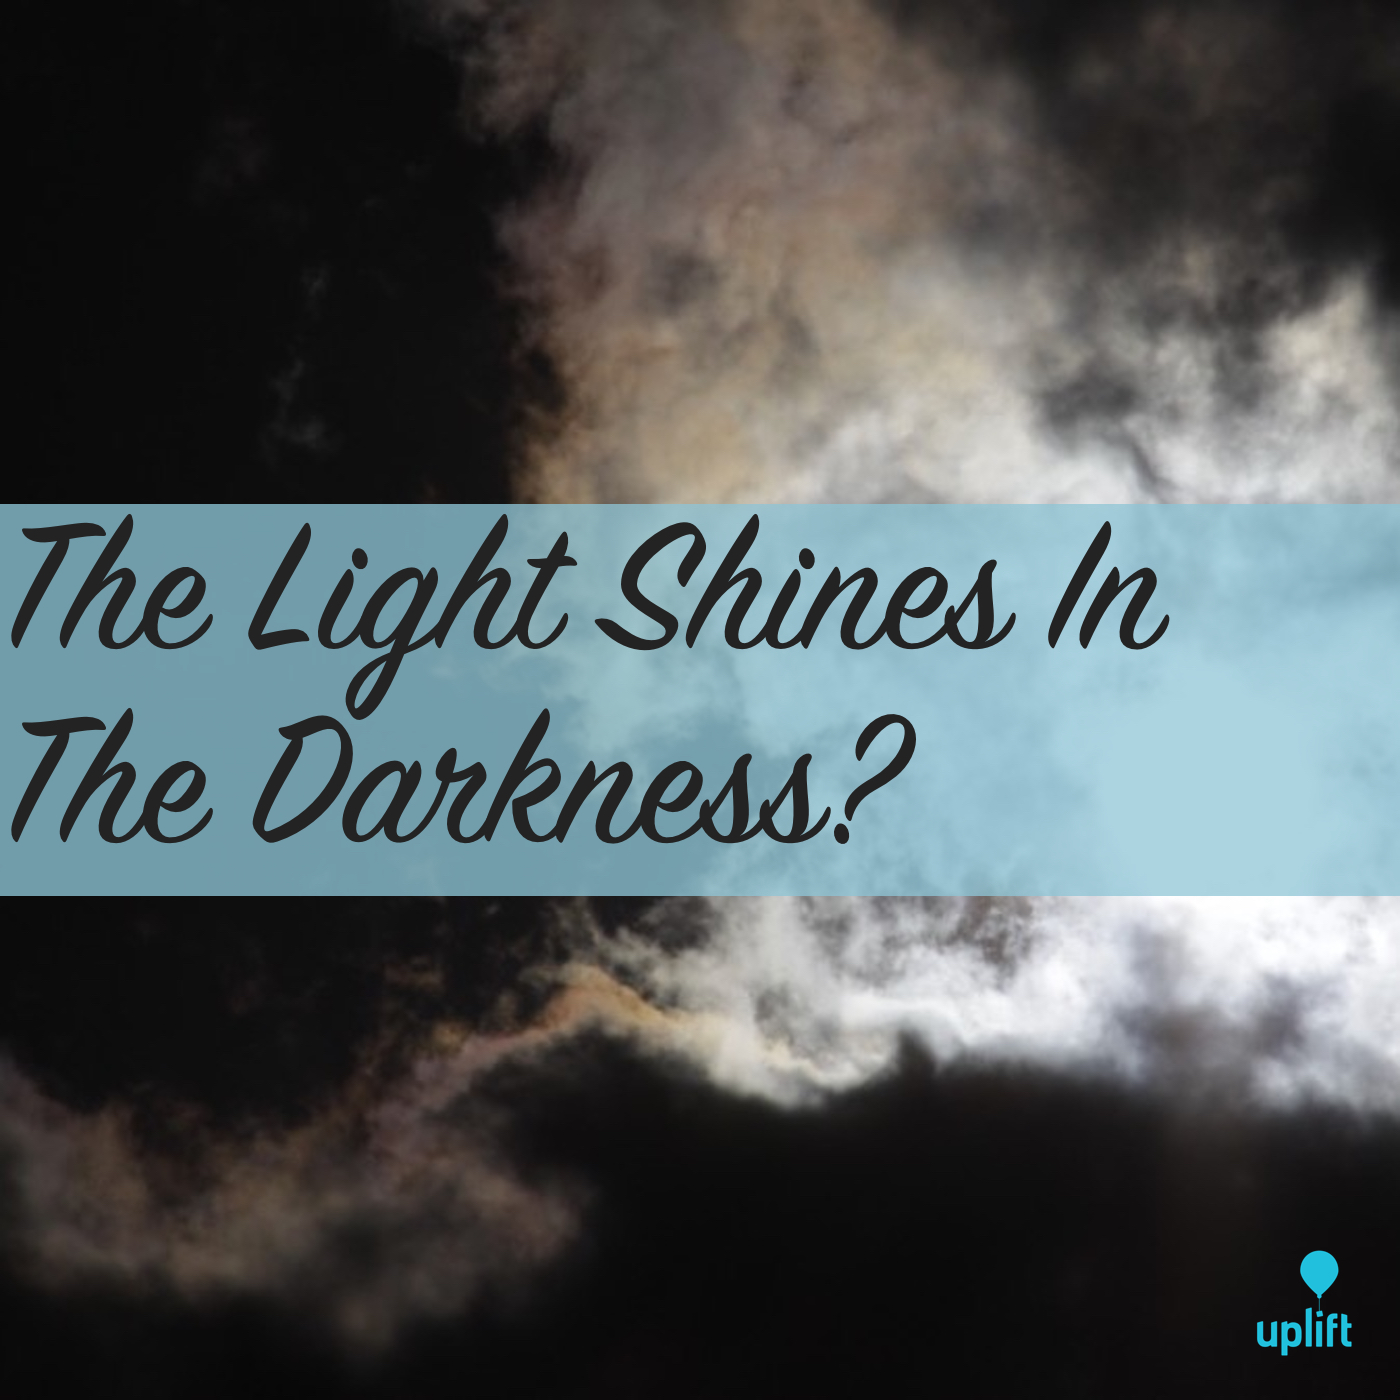 Episode 34: The Light Shines In The Darkness?